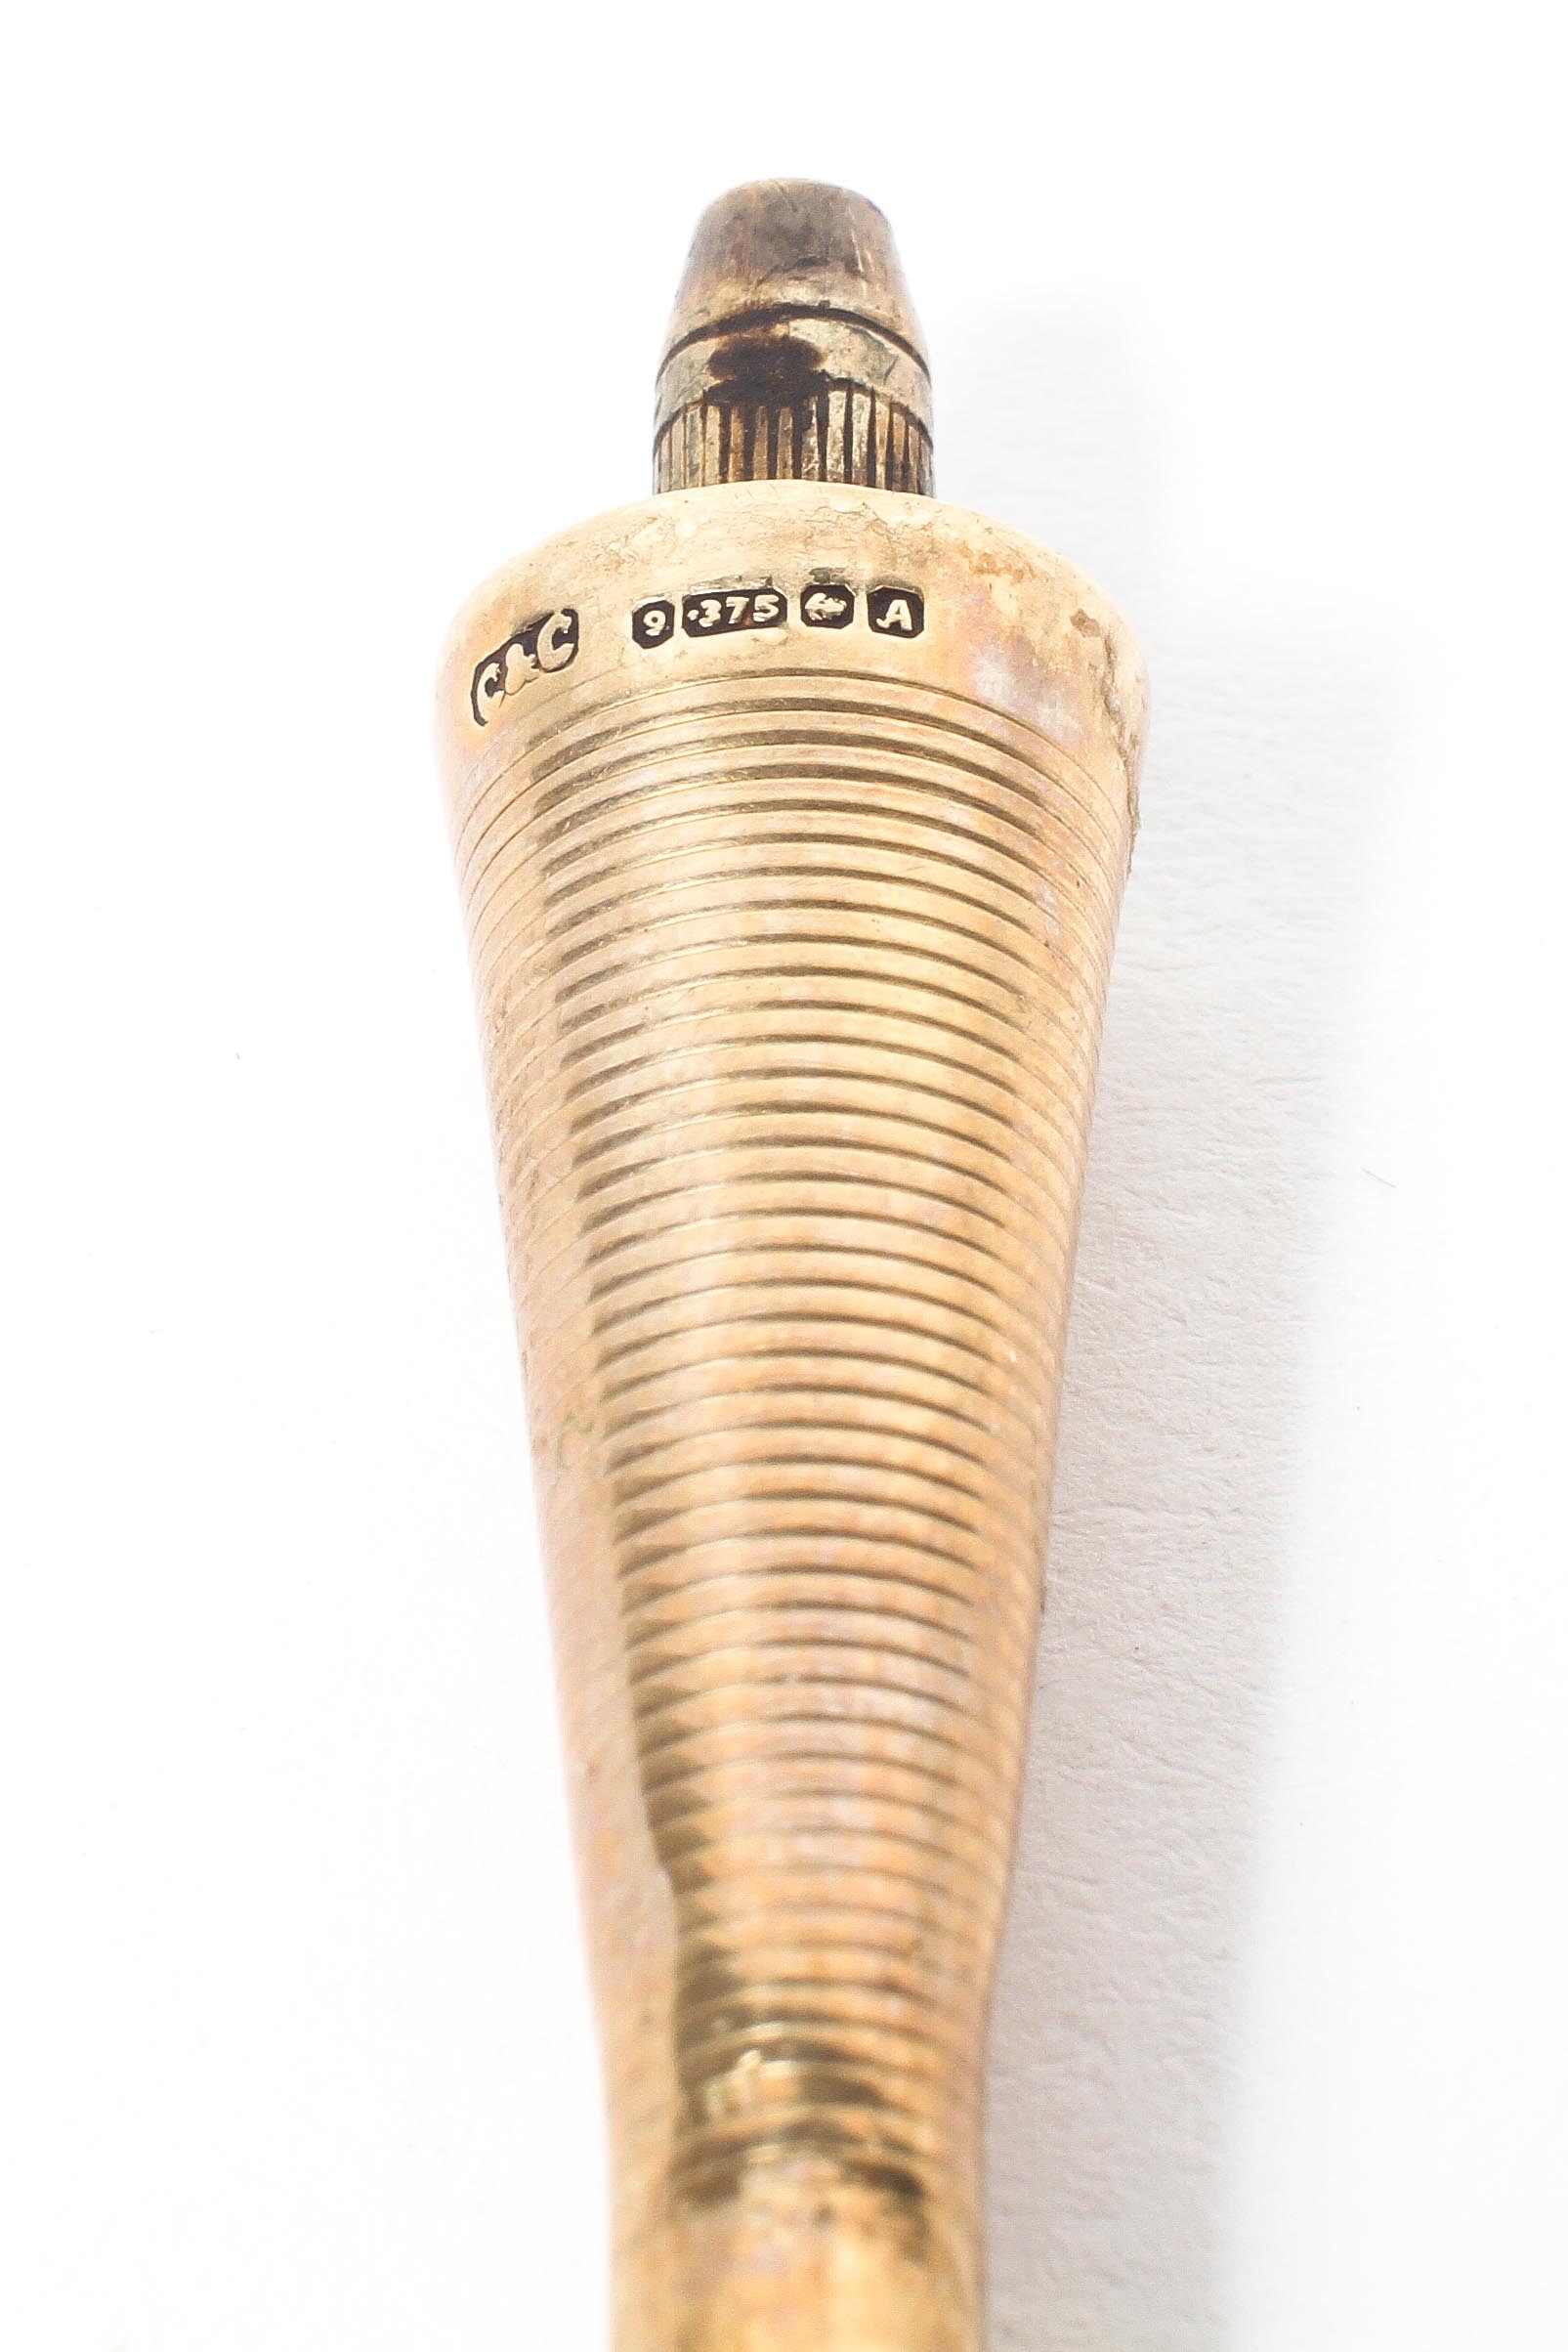 A 9ct gold cheroot holder, of ribbed design. Gross 6.5g. - Image 2 of 2